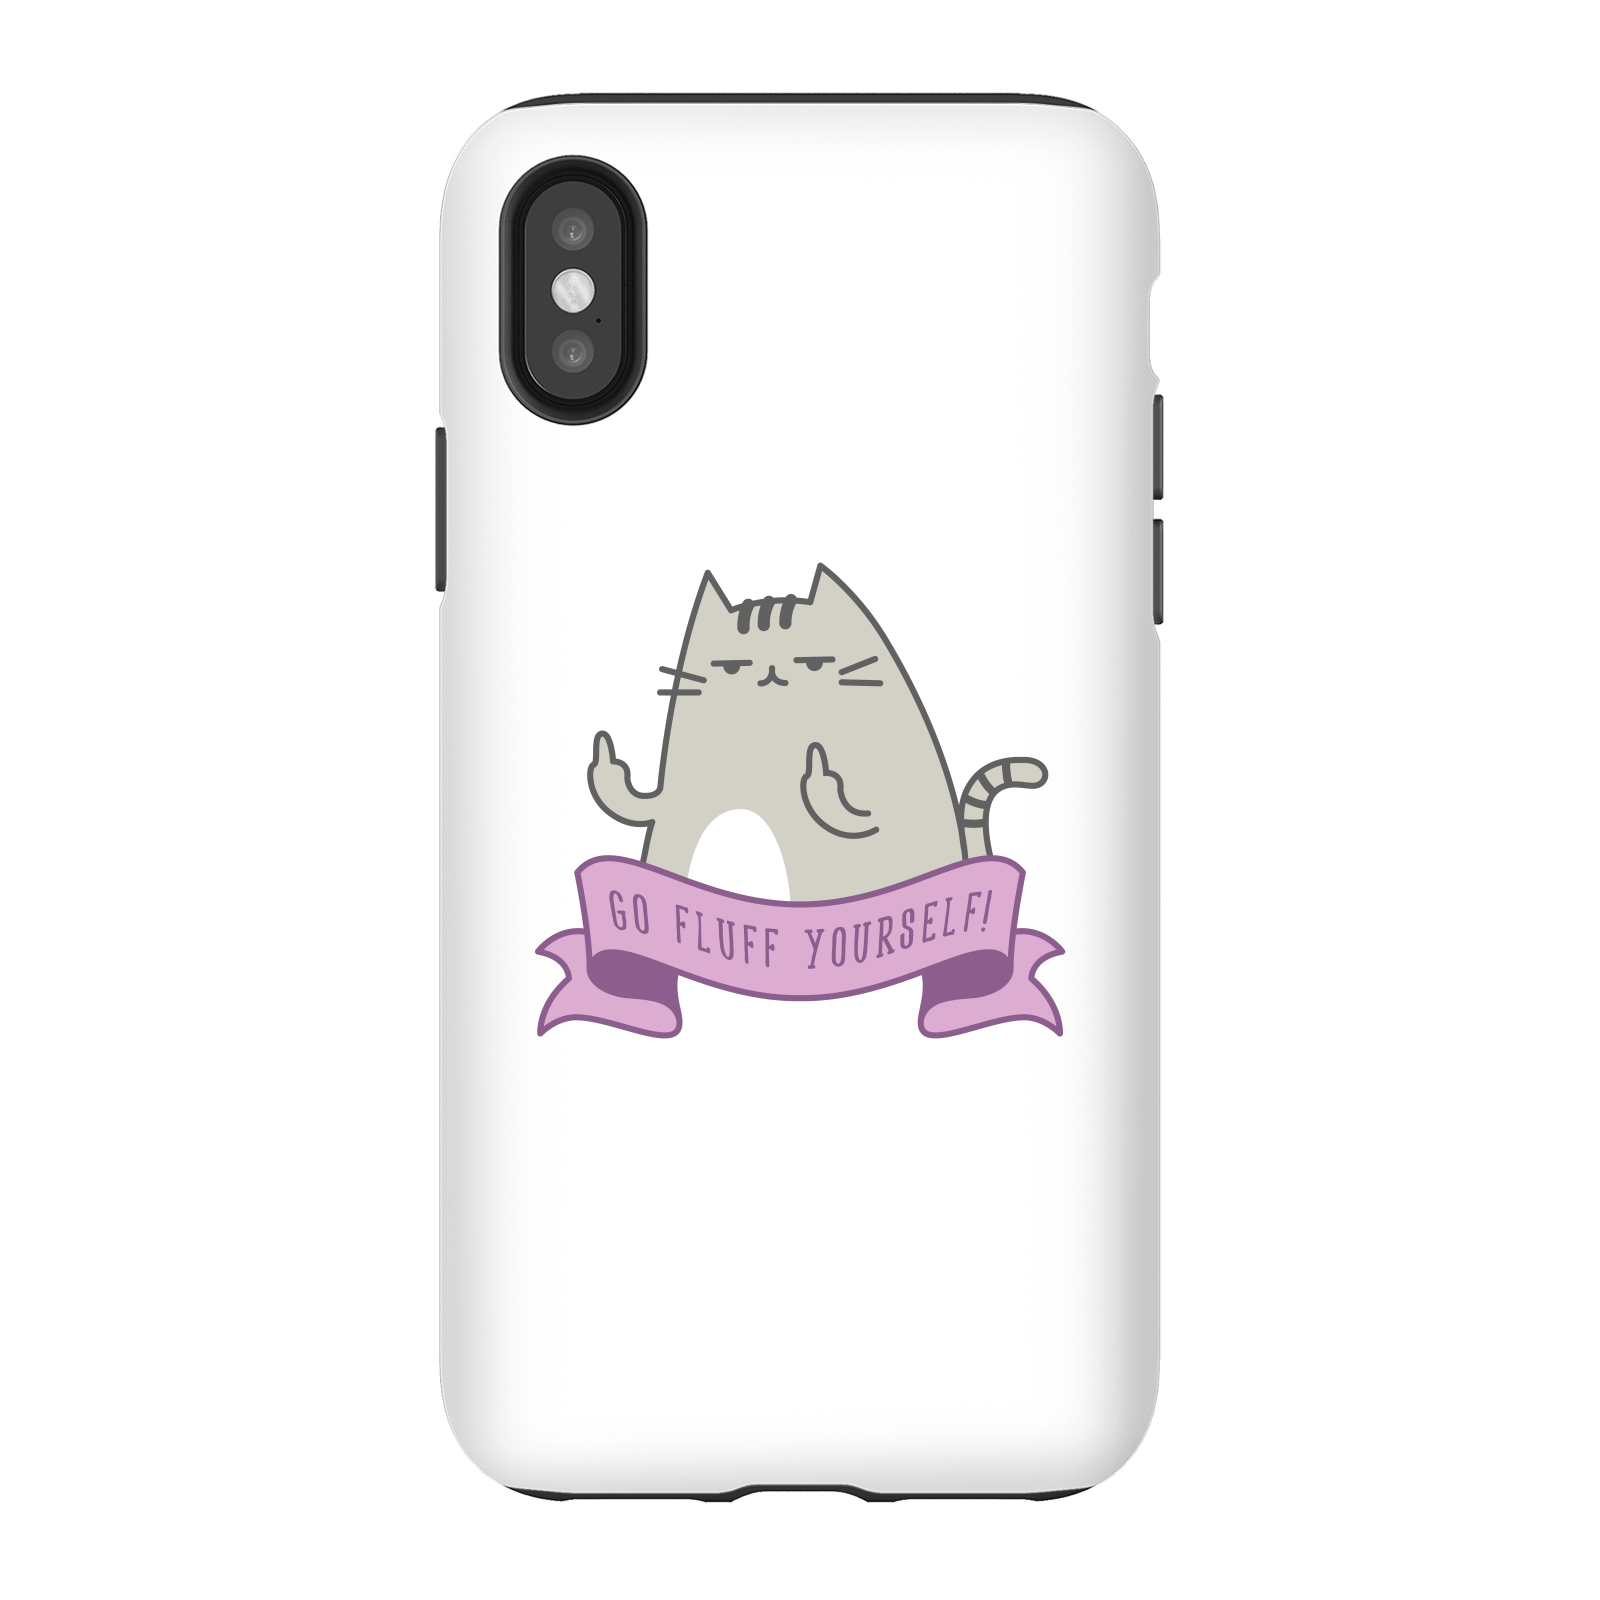 Go Fluff Yourself! Phone Case for iPhone and Android - iPhone X - Tough Case - Matte